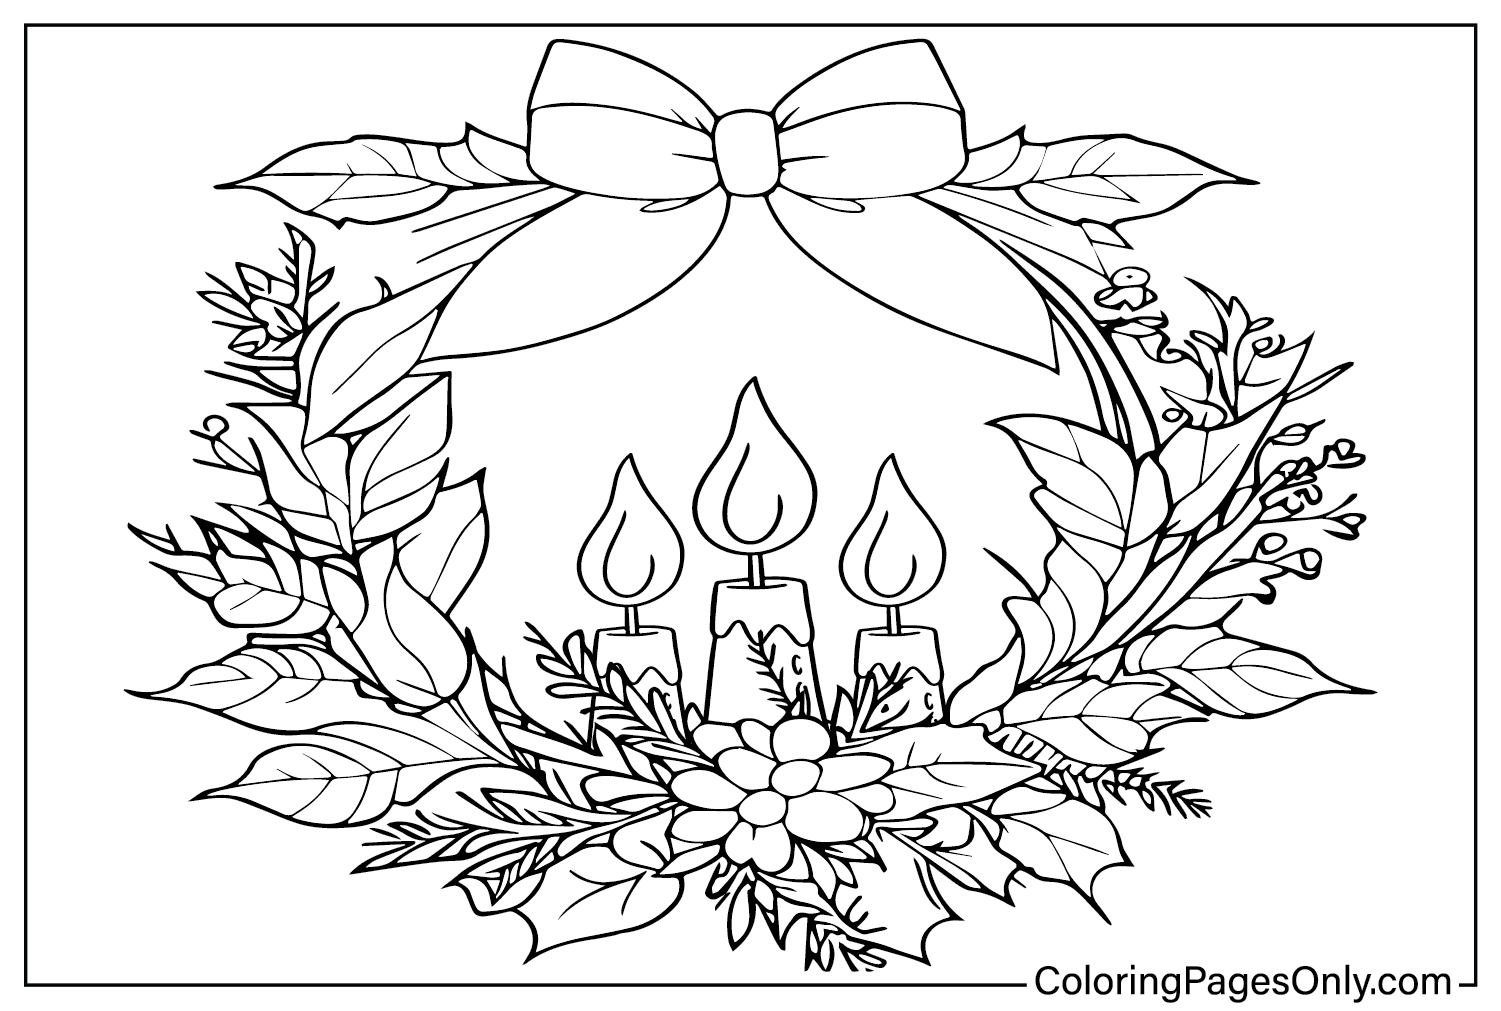 Advent Wreath Coloring Page Printable - Free Printable Coloring Pages